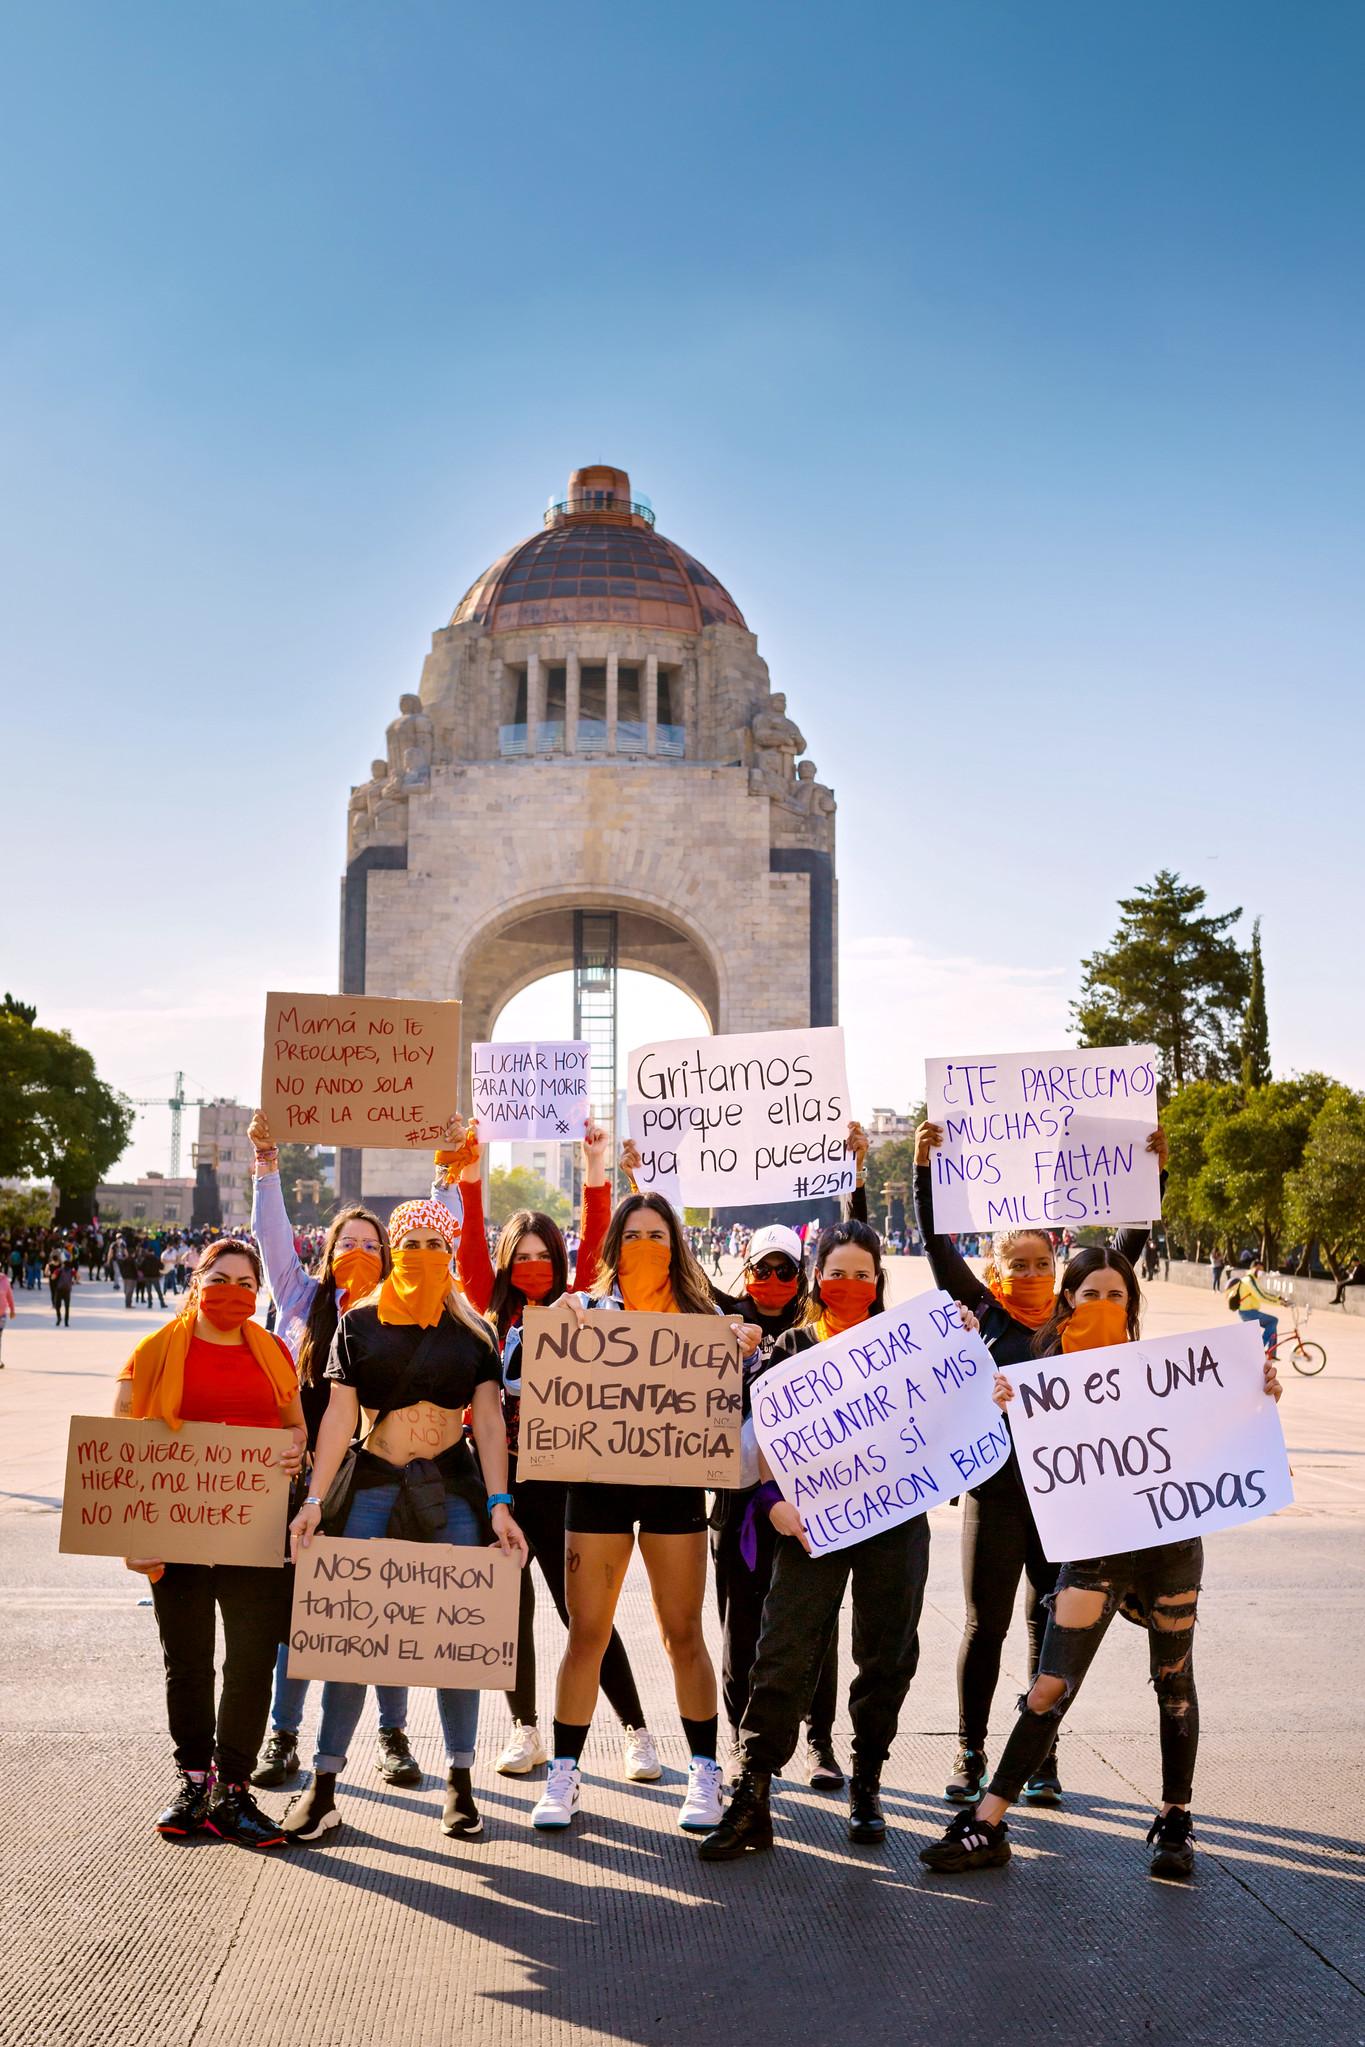 Women in Mexico City  joined the 25th of November demonstration raising awareness towards the elimination of violence against women and girls. Photo: UN Women/Dzilam Méndez